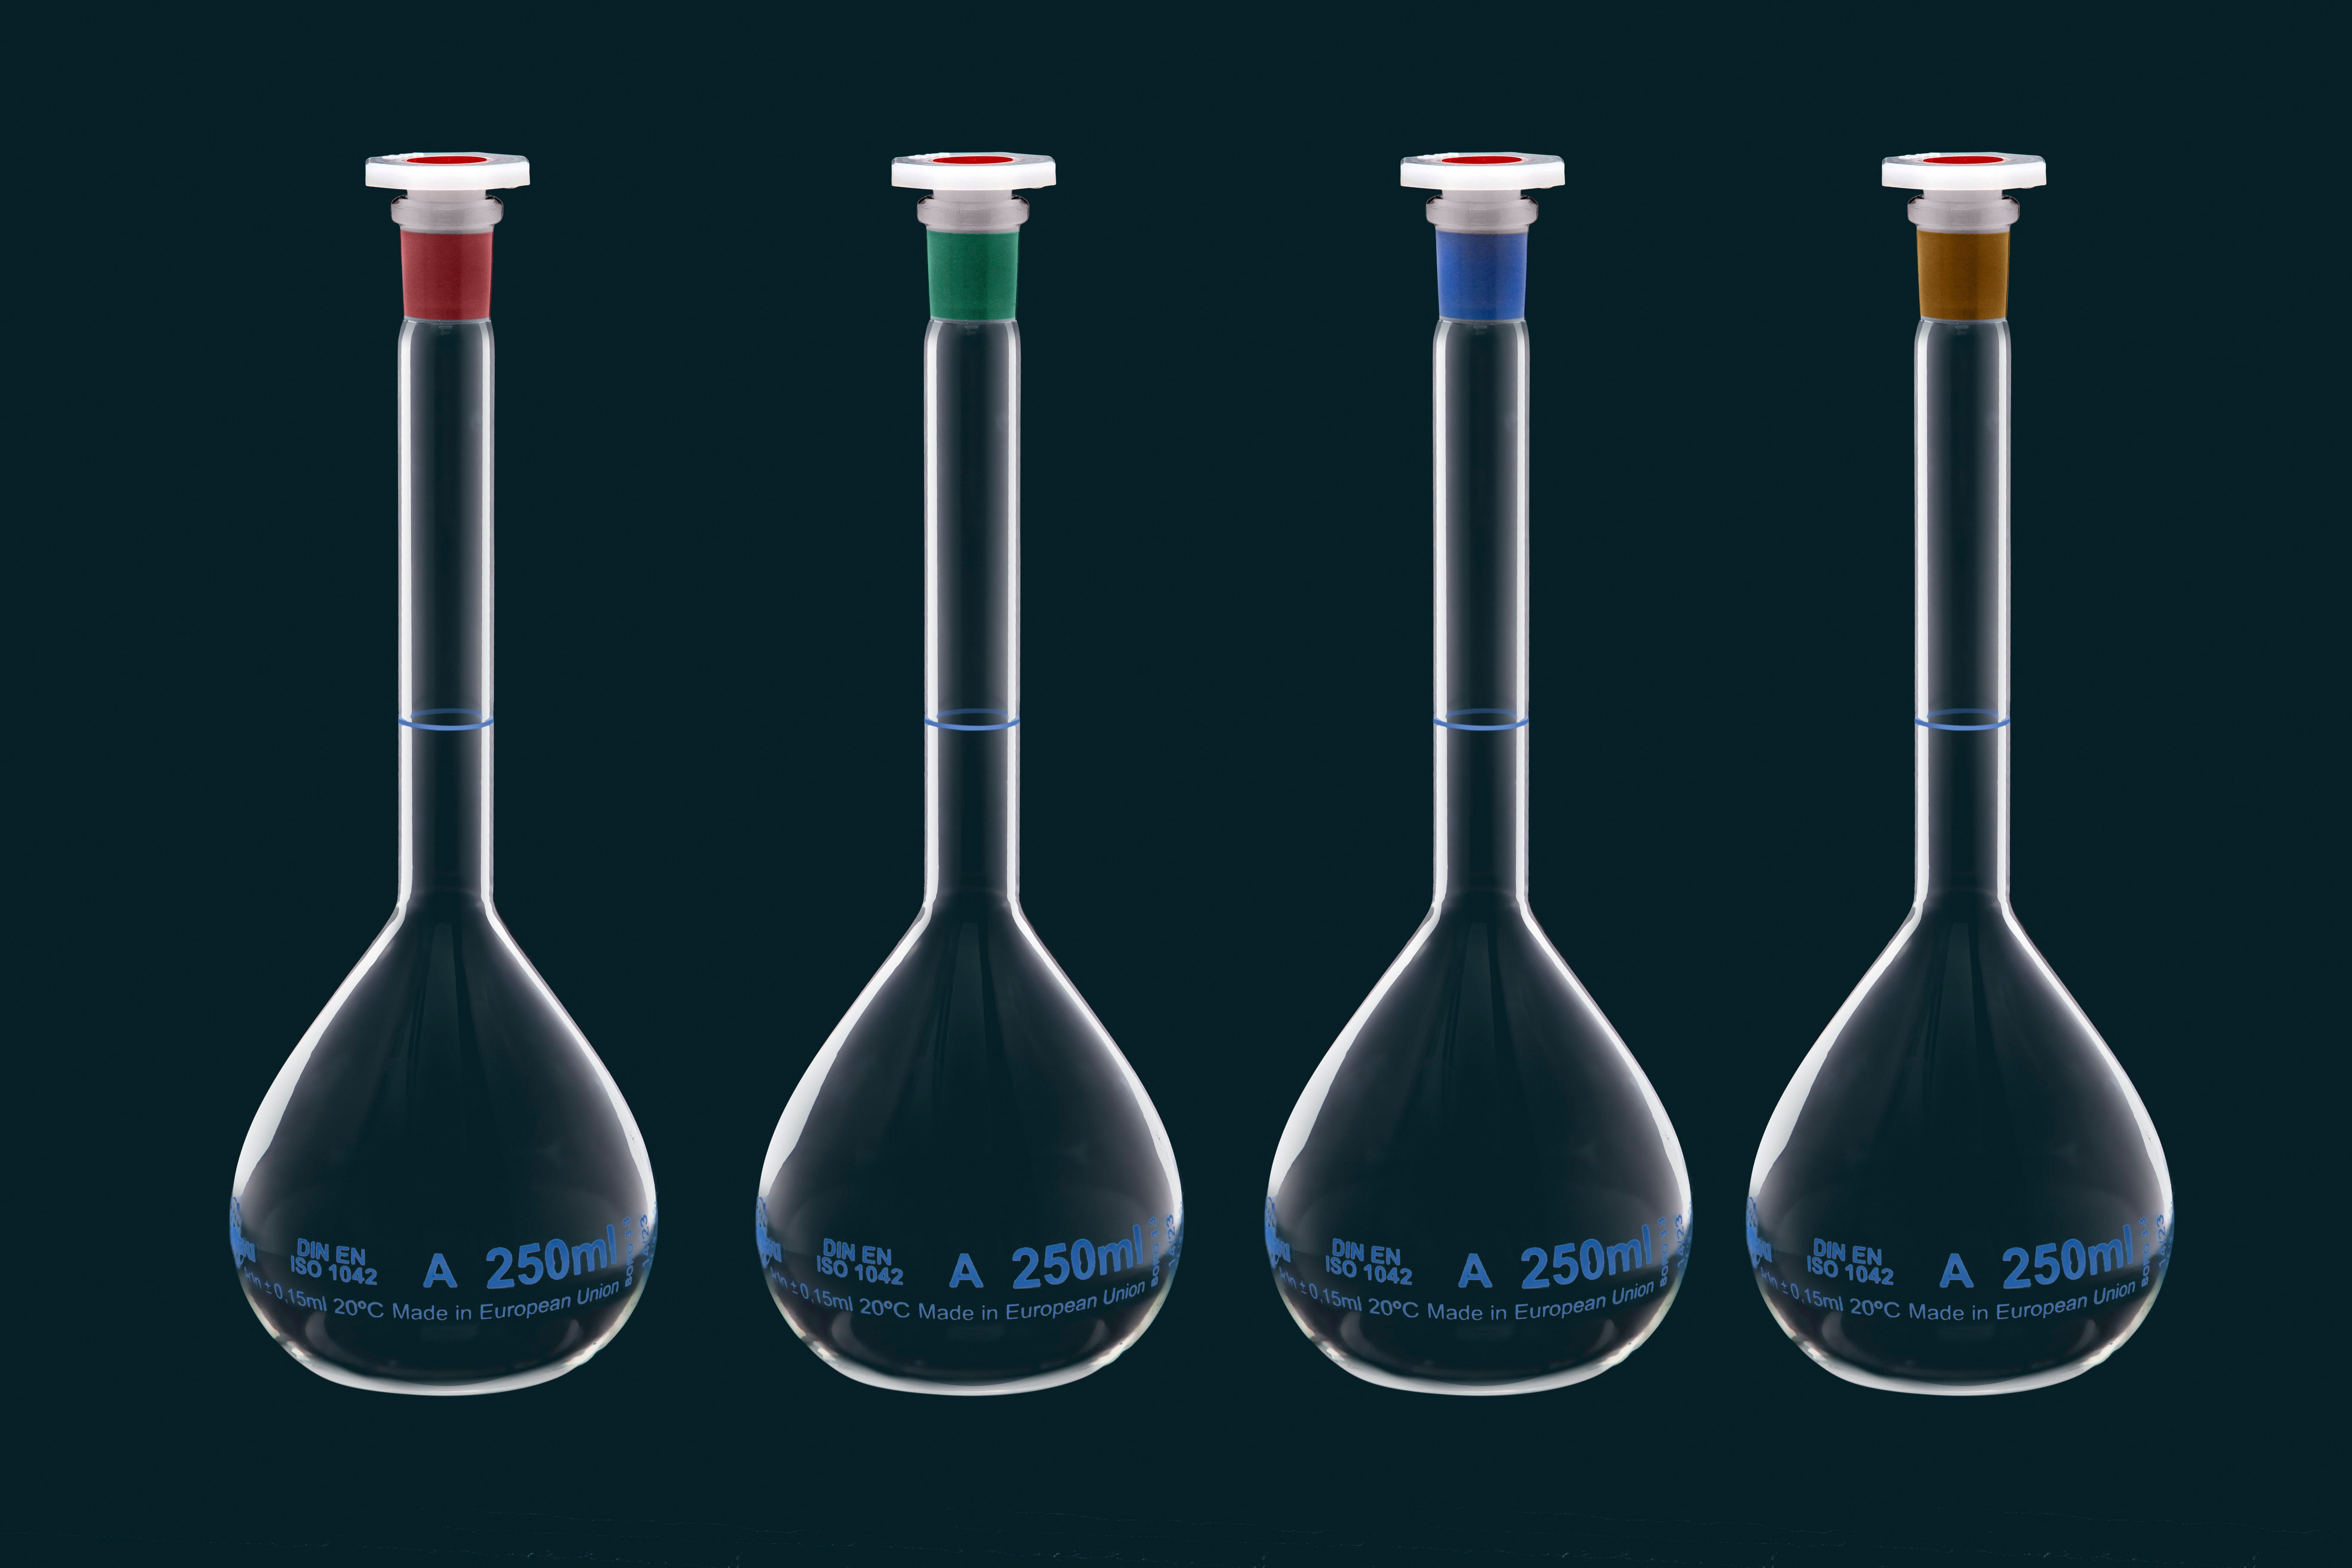 Volumetric flask with yellow neck, class A, 250ml, with PE stopper, lot number and certificate of conformity